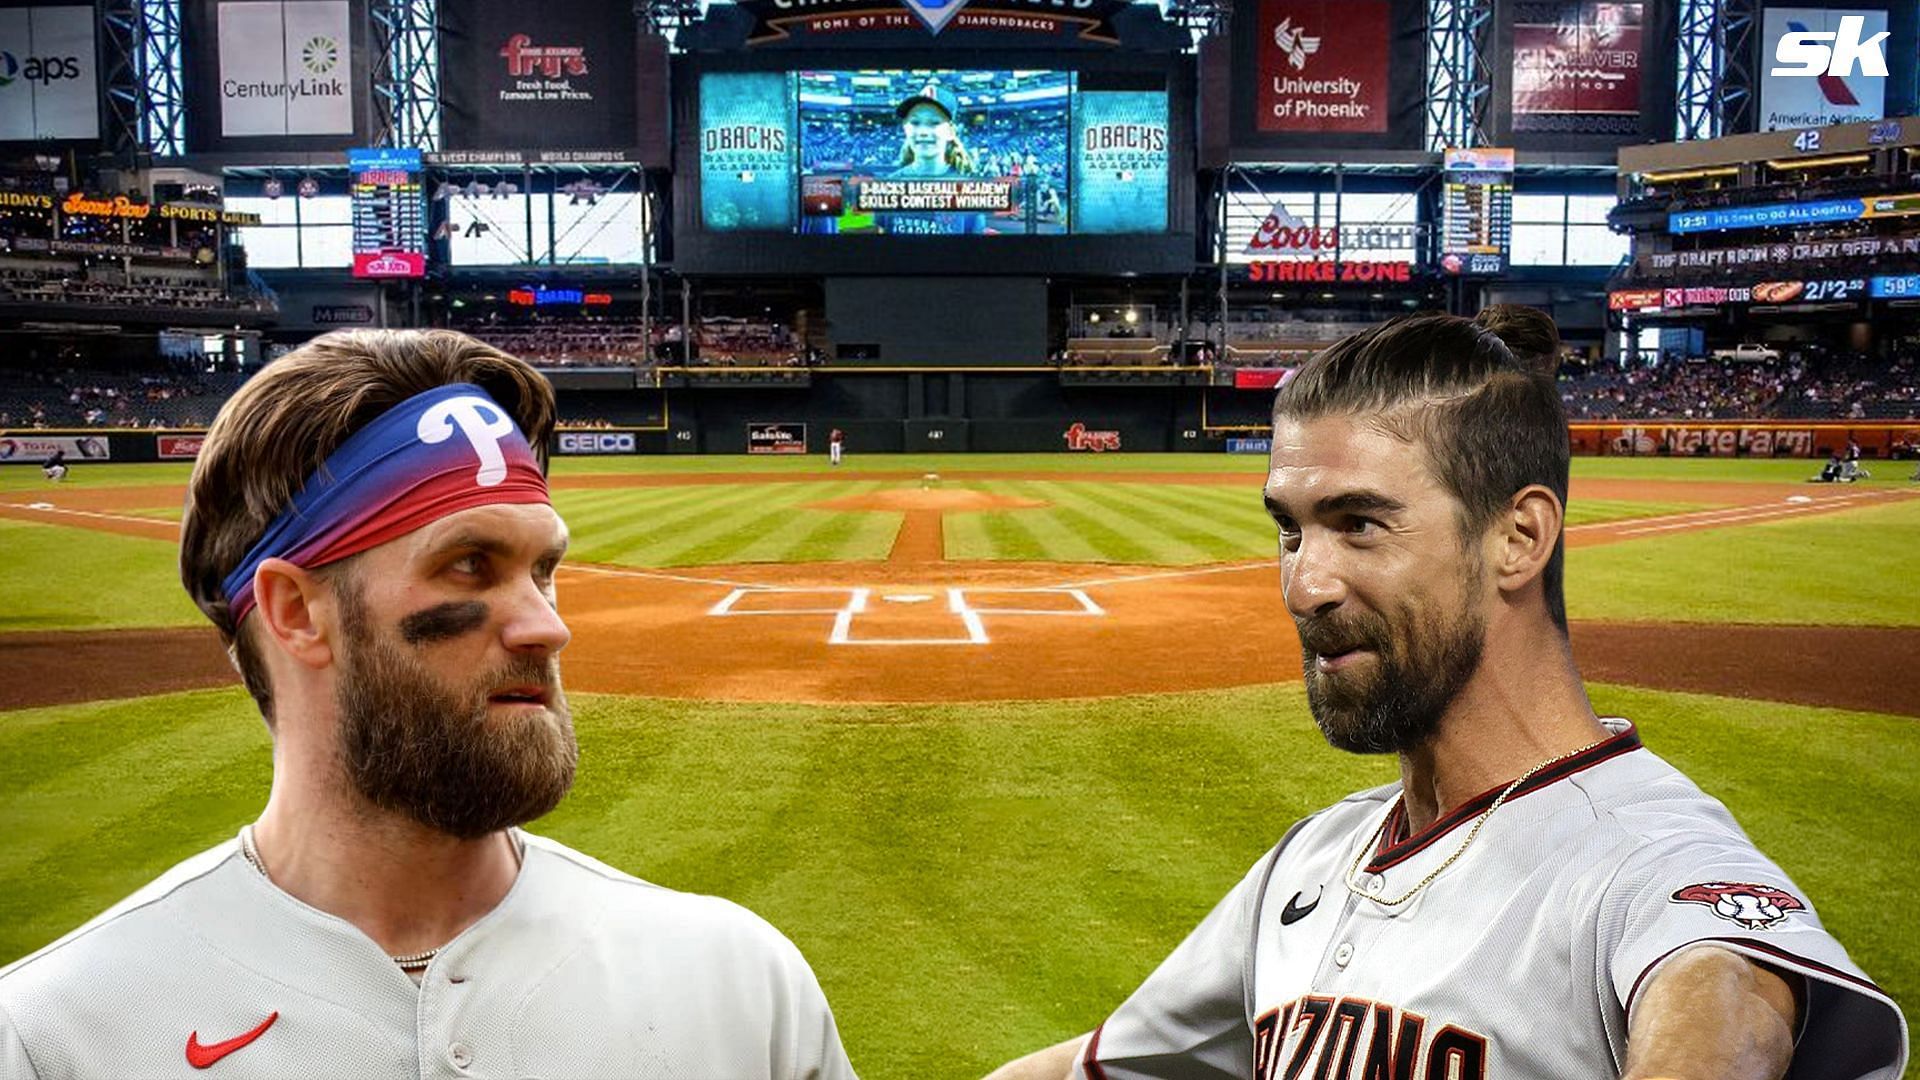 Bryce Harper gestured towards Olympic swimmer Michael Phelps after his Game 5 homerun